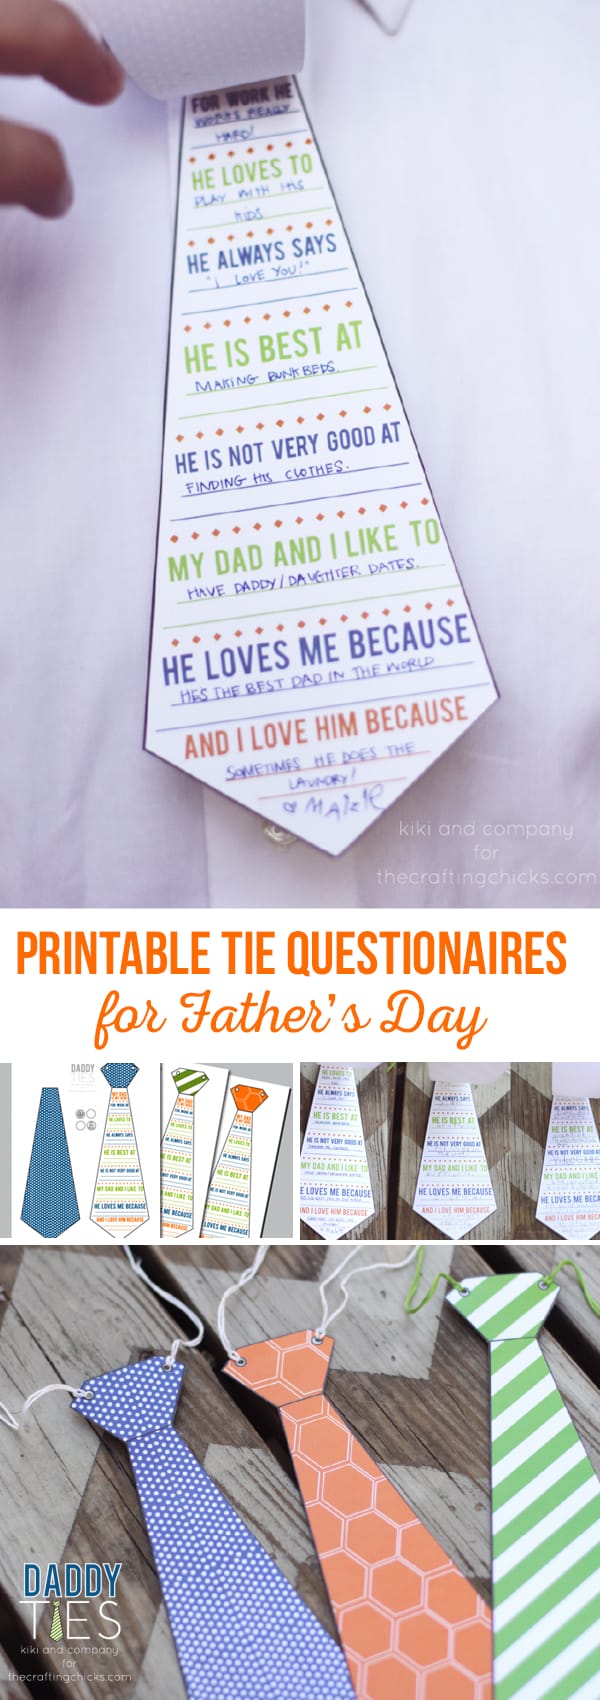 Printable Tie Questionaires for Father's Day